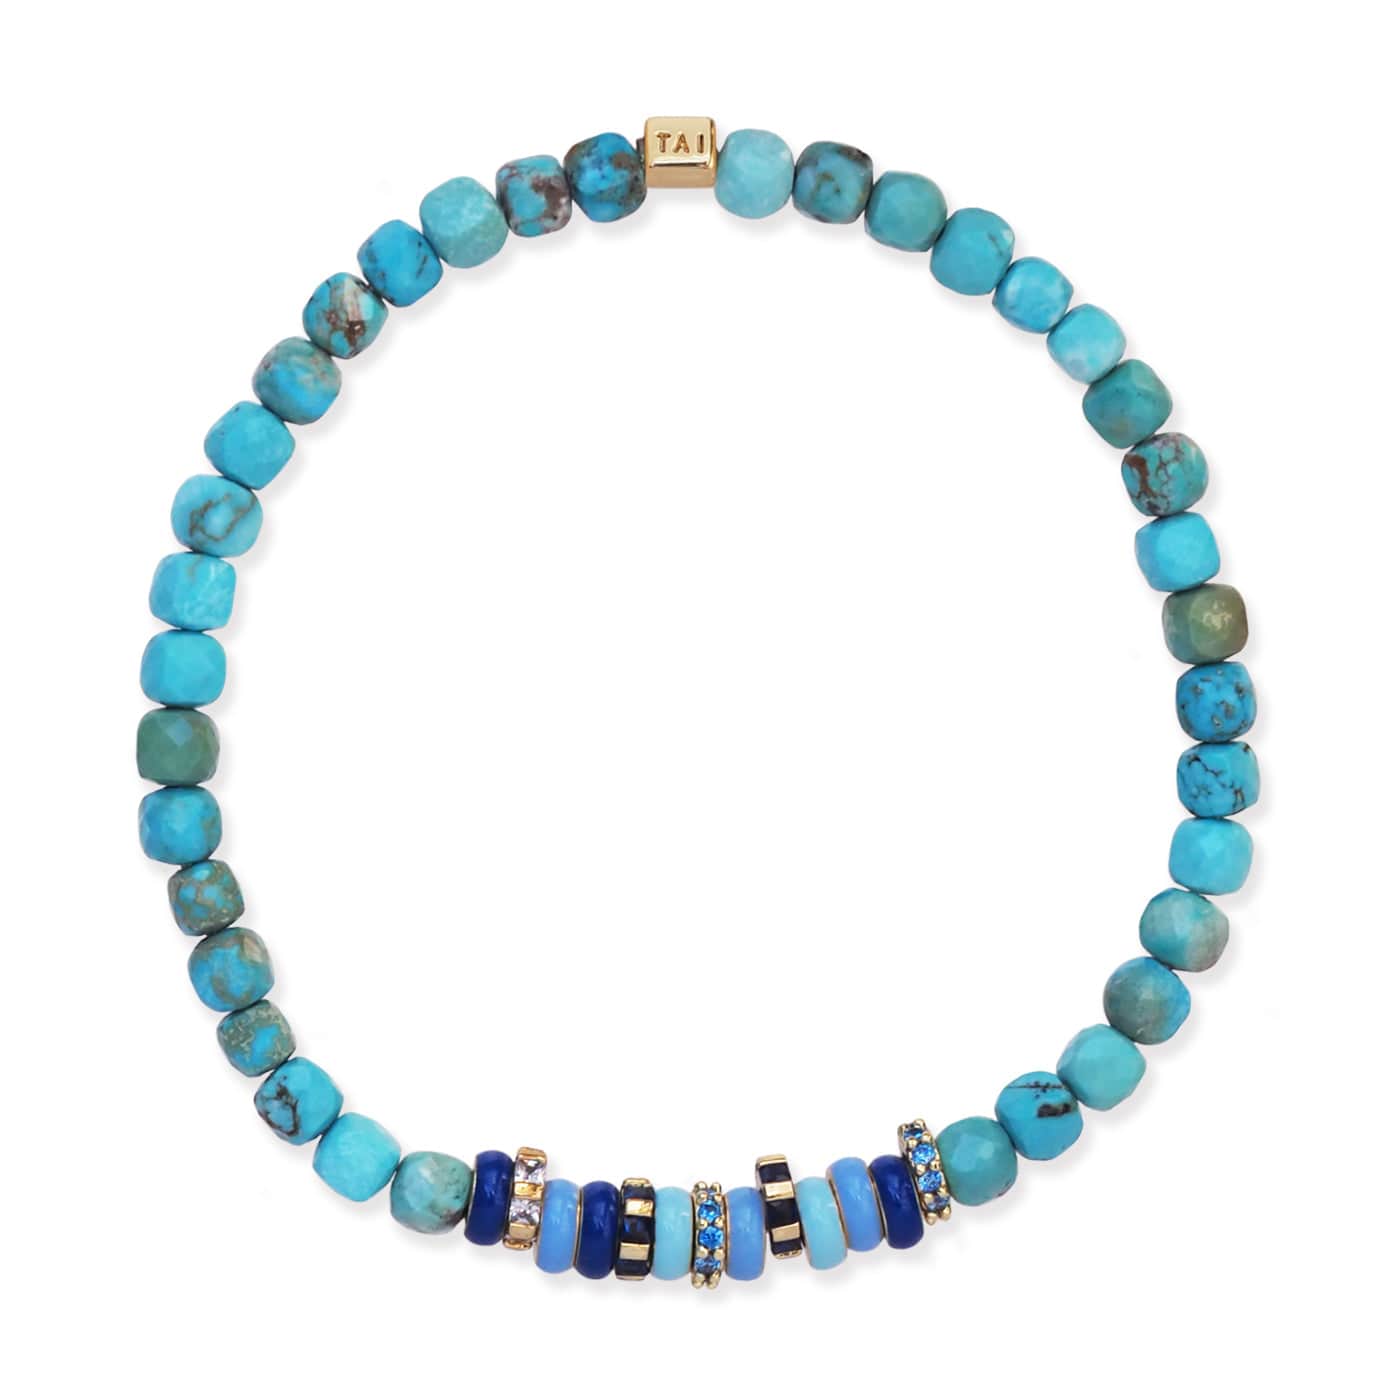 TAI JEWELRY Bracelet Turquoise Semi-Precious Stretch Bracelet with Colored and CZ Rondelles